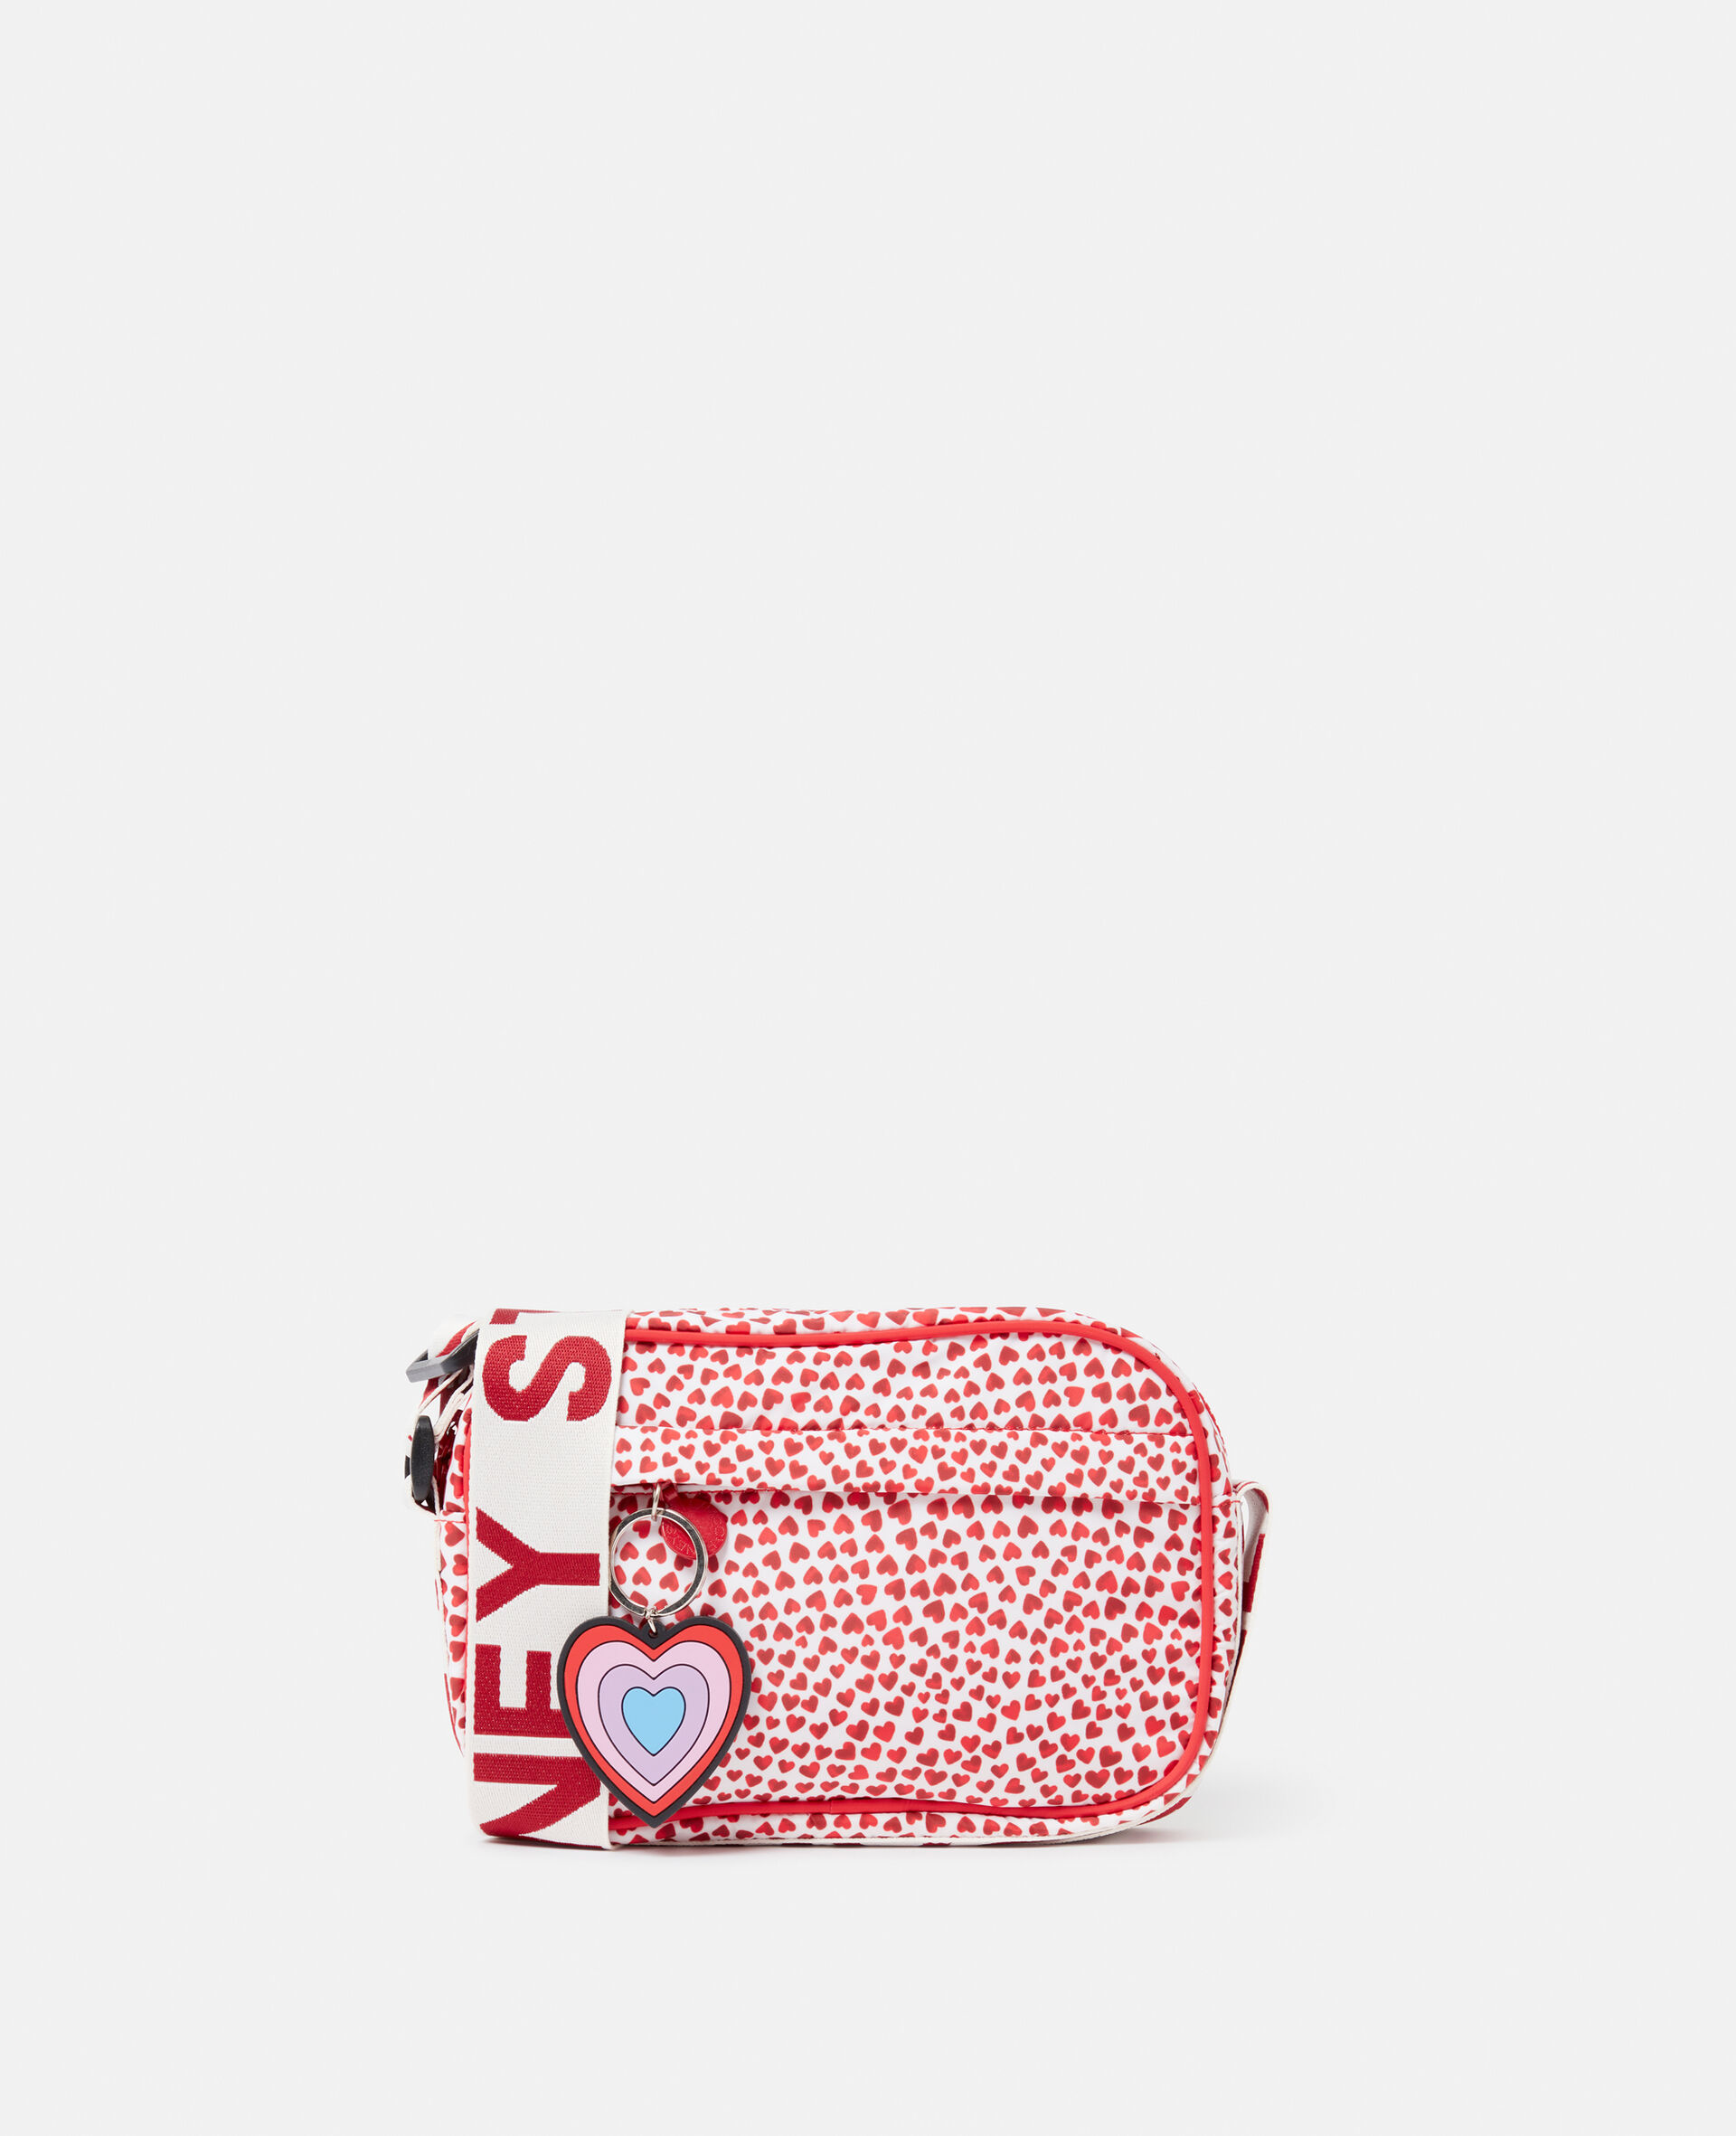 High Summer Hearts Crossbody Bag-Multicolour-large image number 0